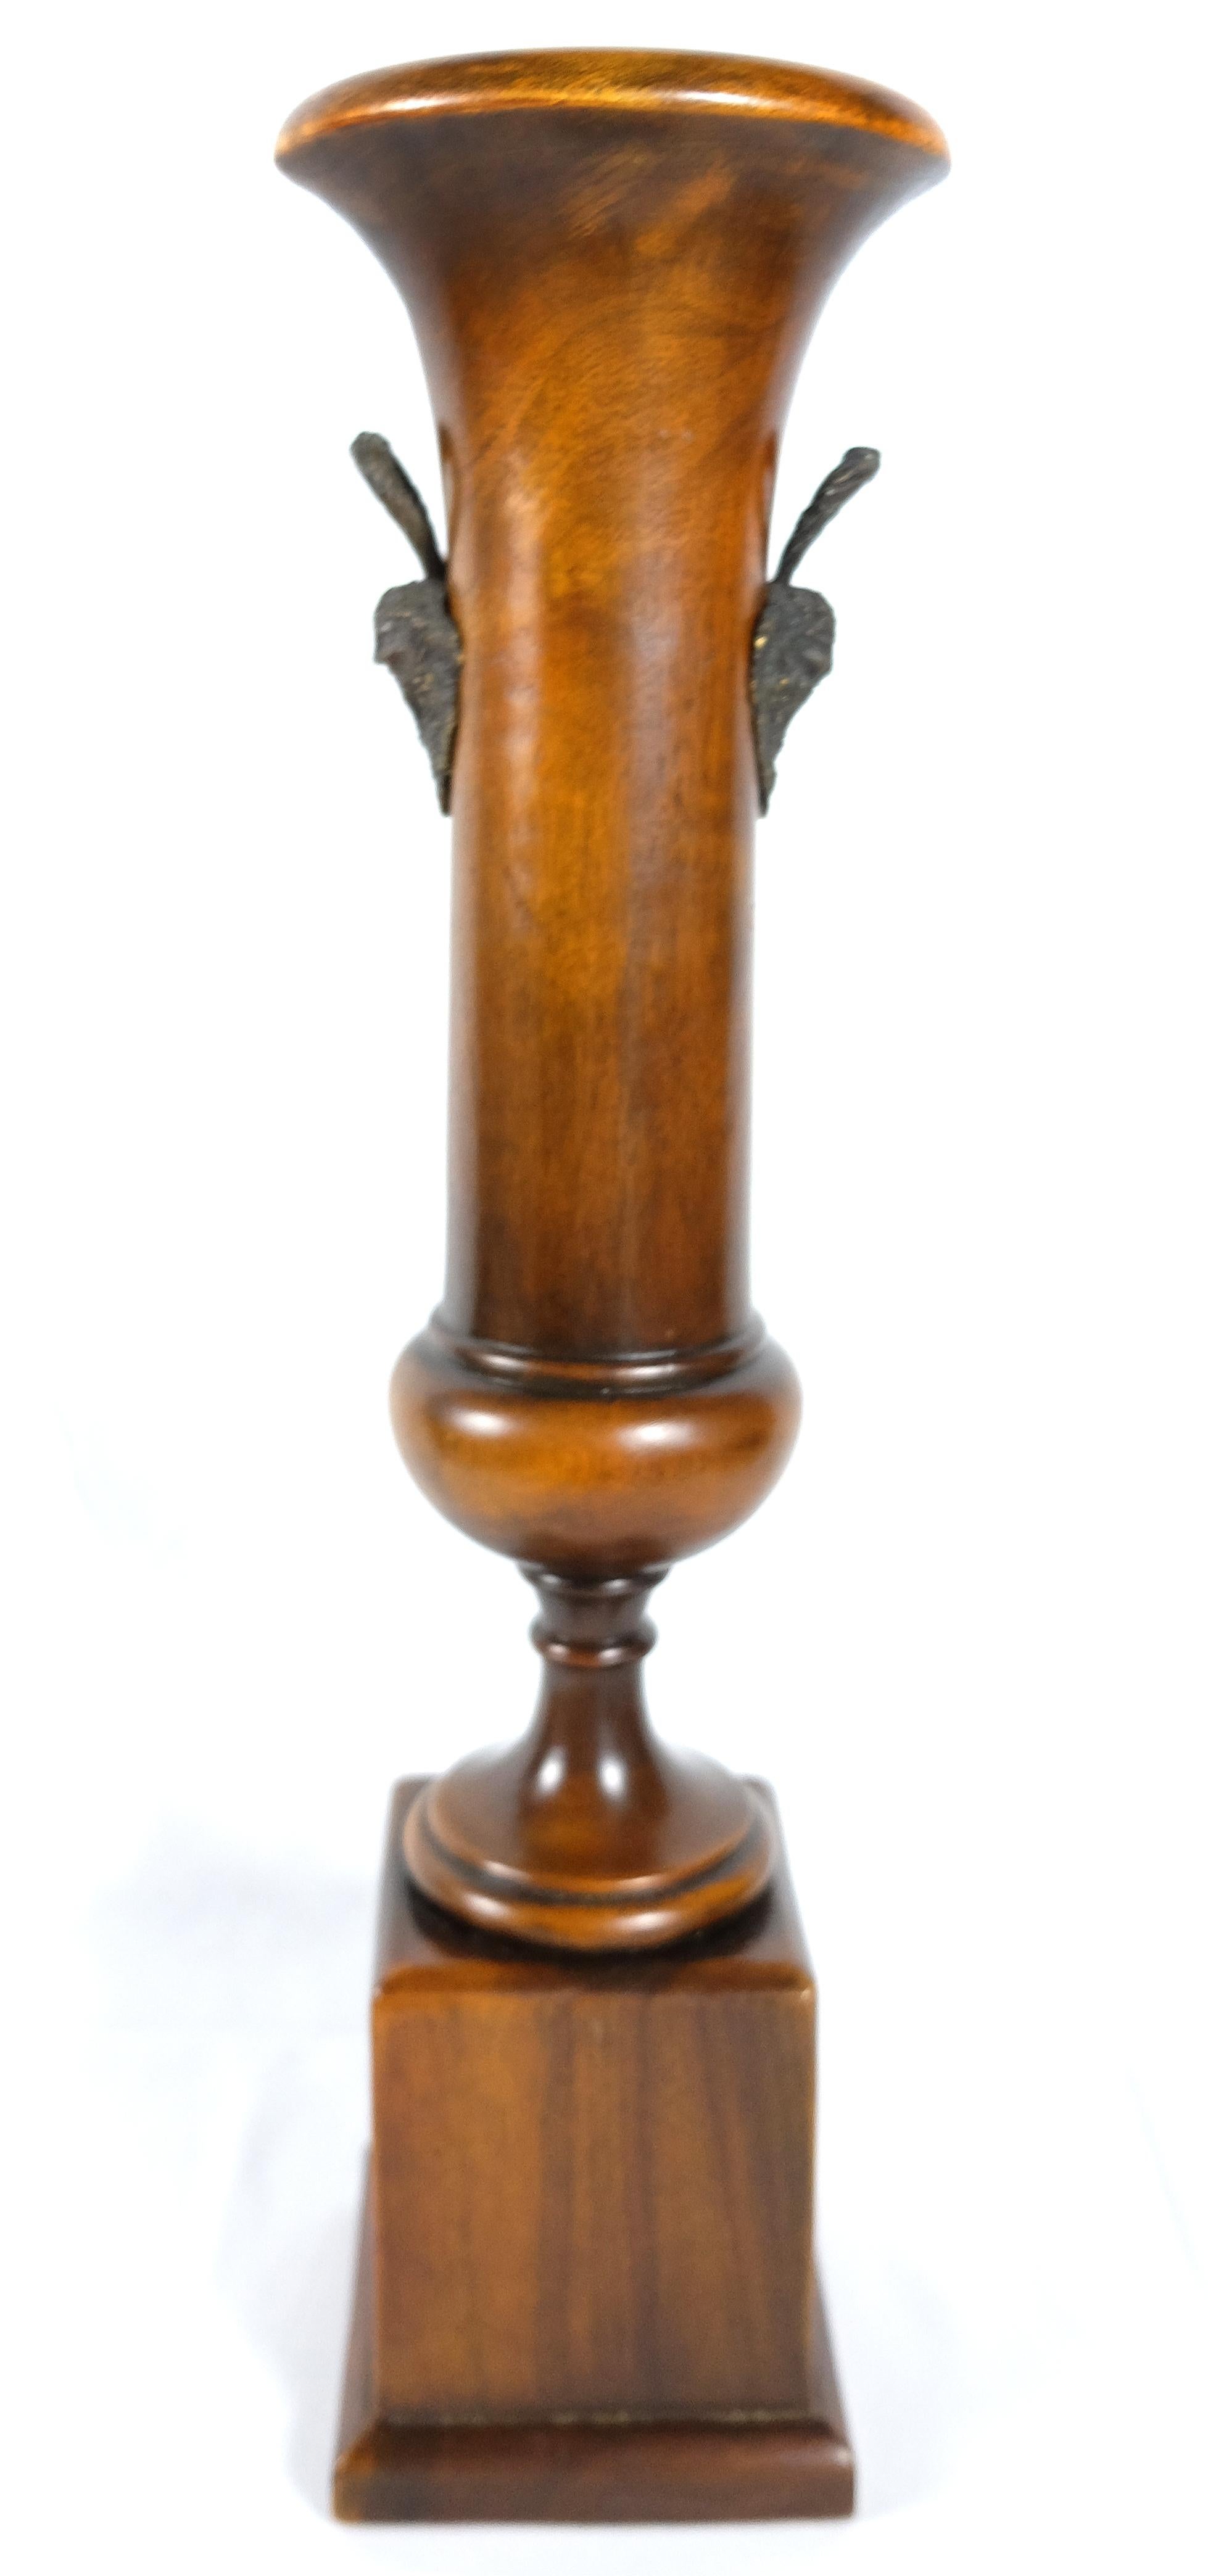 Wooden Pedestal Urn Vase by Theodore Alexander with Bronze and Cameo Details

Offered for sale is a tall wooden pedestal urn form vase by Theodore Alexander. The vase is accented with bronze details including a Wedgewood style cameo.